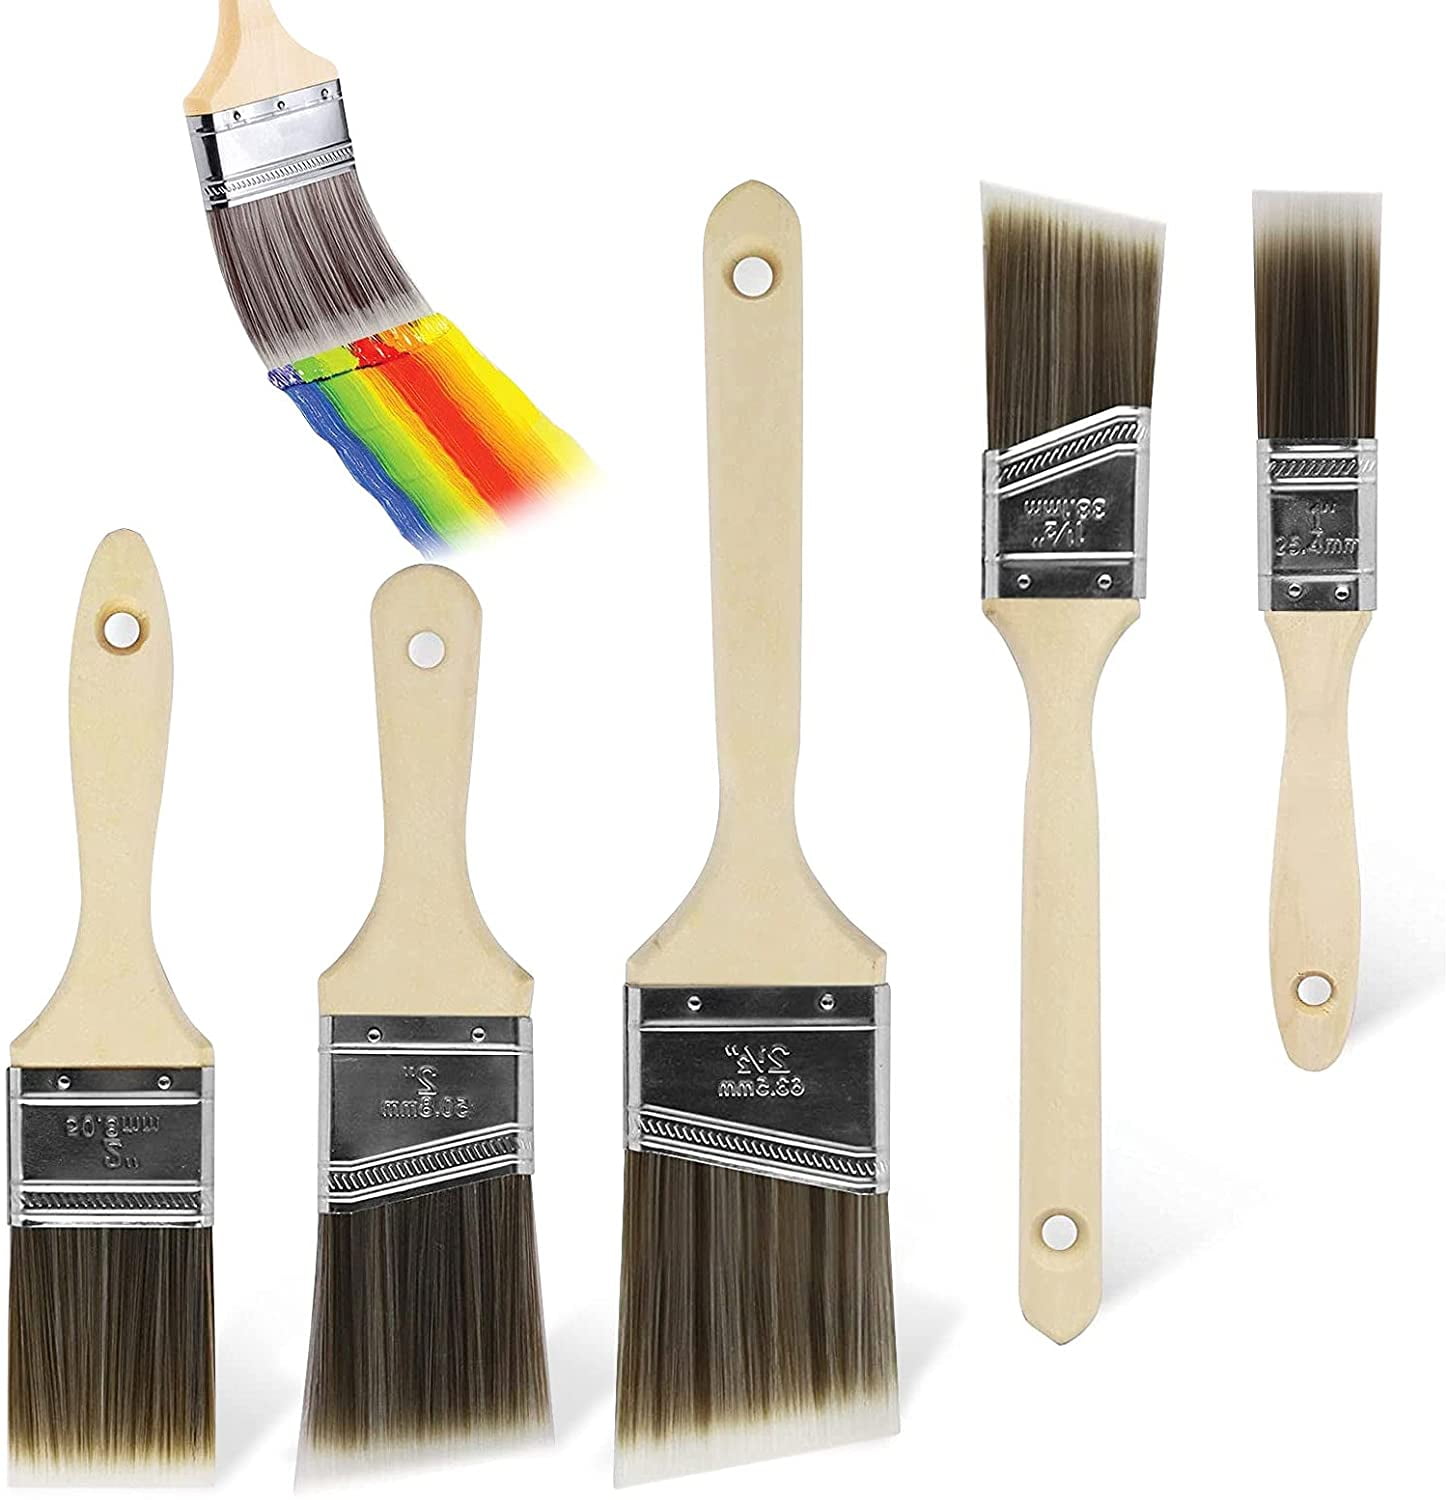 ValueMax Paint Brushes Set 6-Pack, Professional Wall Brush, Deck Stain Brush, Flat Small Paintbrushes, Thick Poly Bristles, Ergonomic Handle, for